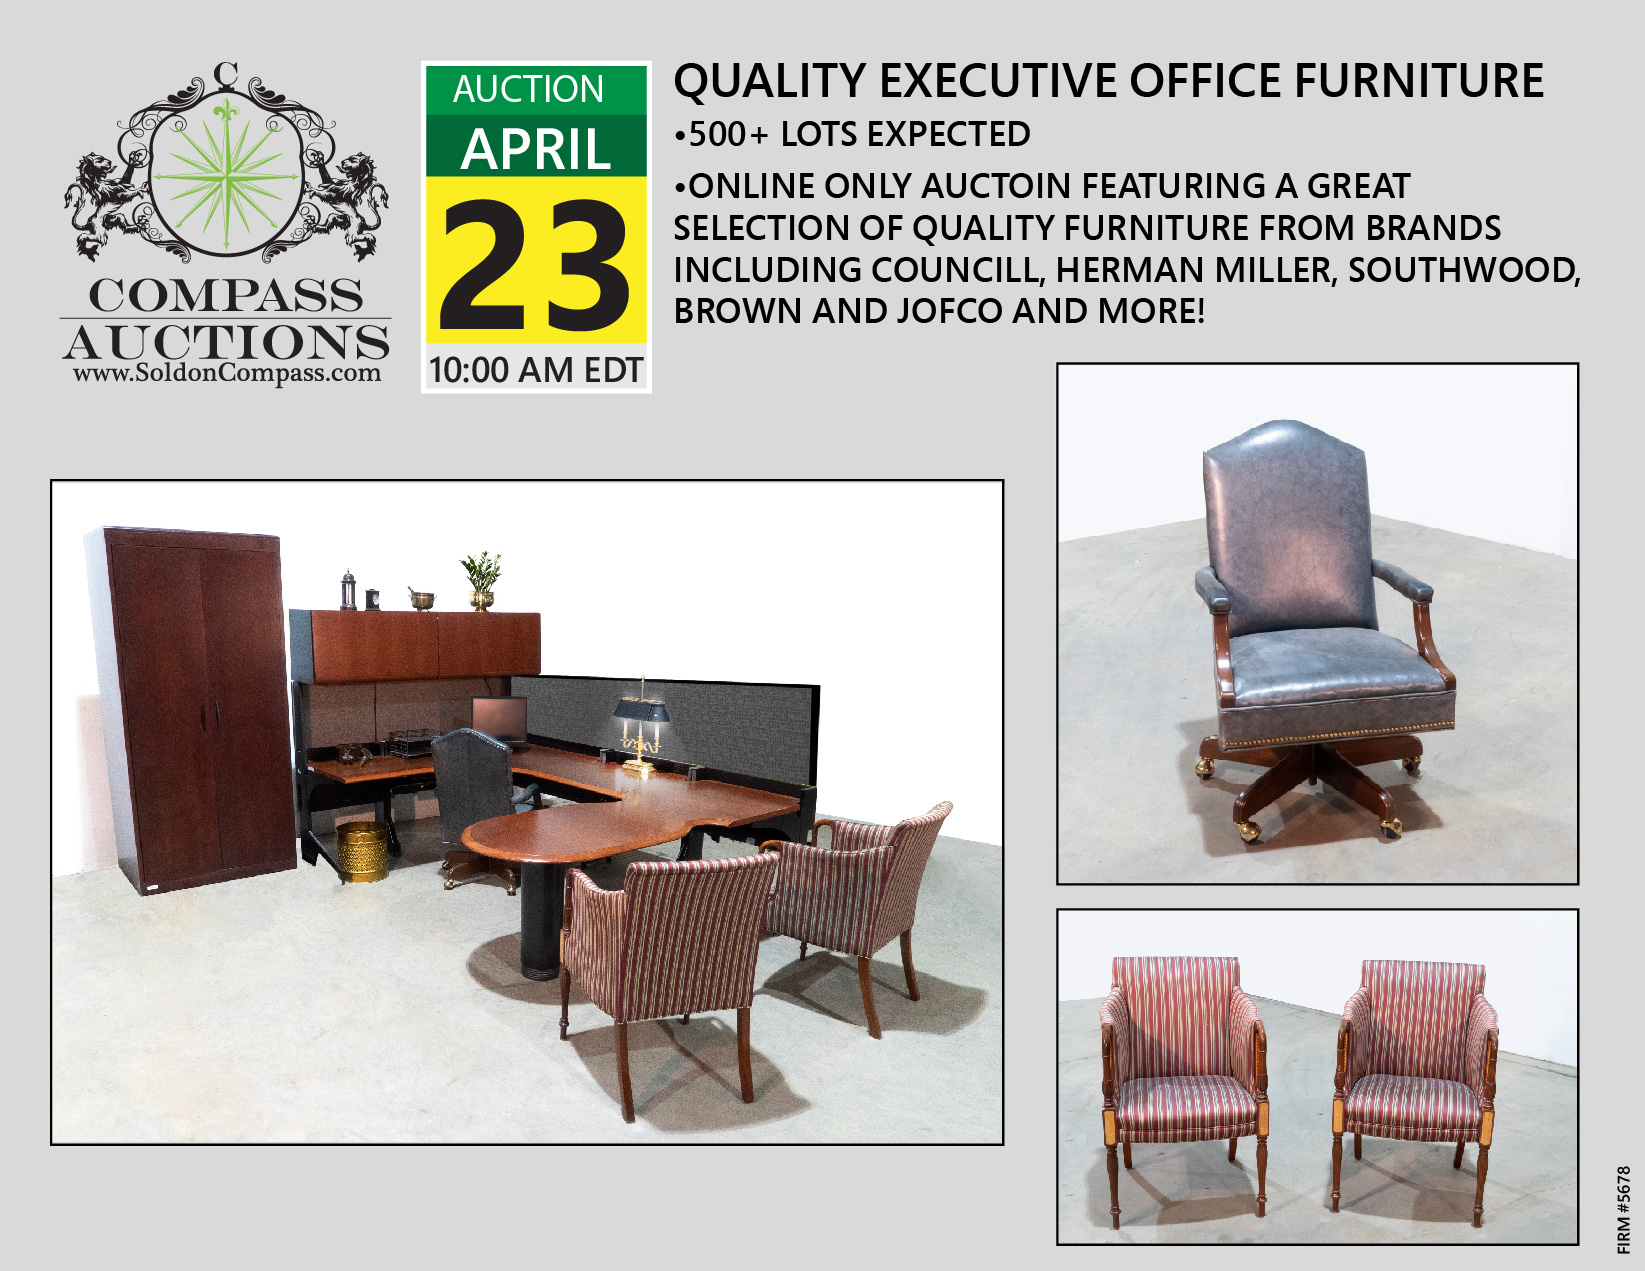 Compass Auctions Online Executive Office Furniture April 2019